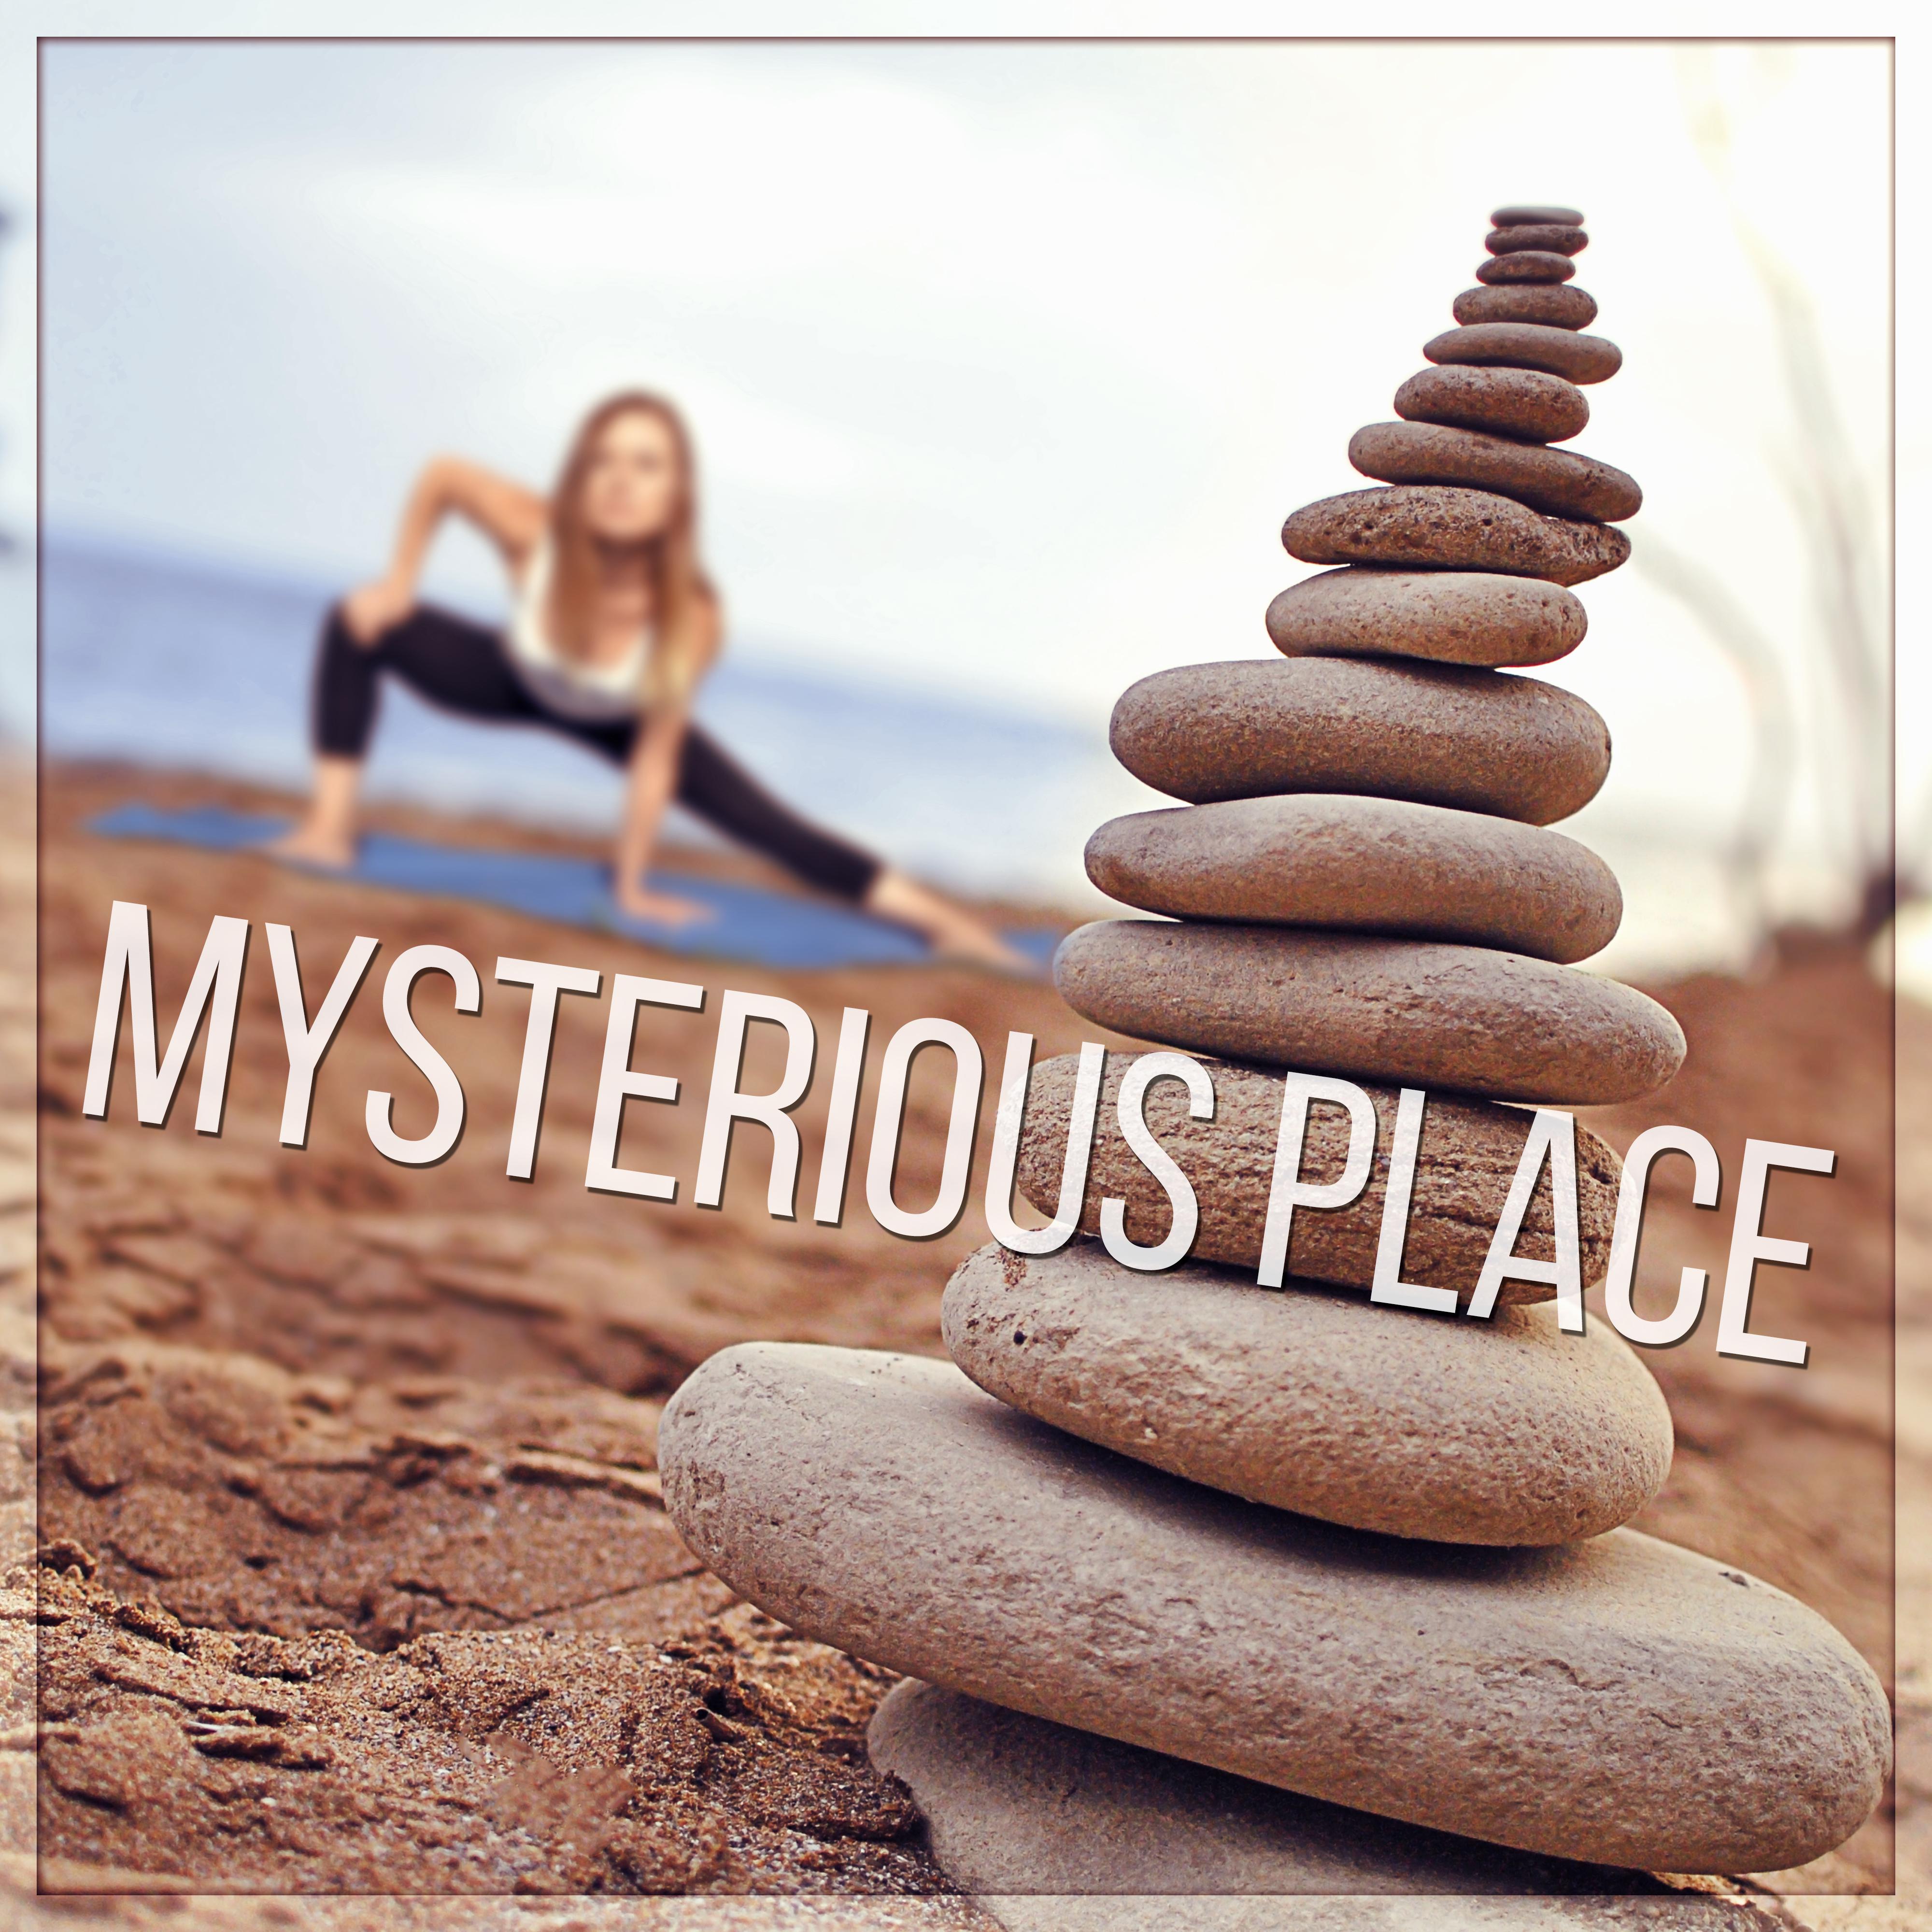 Mysterious Place – Relaxing Songs for Mindfulness Meditation & Yoga Exercises, Guided Imagery Music, Asian Zen Spa and Massage, Natural White Noise, Sounds of Nature